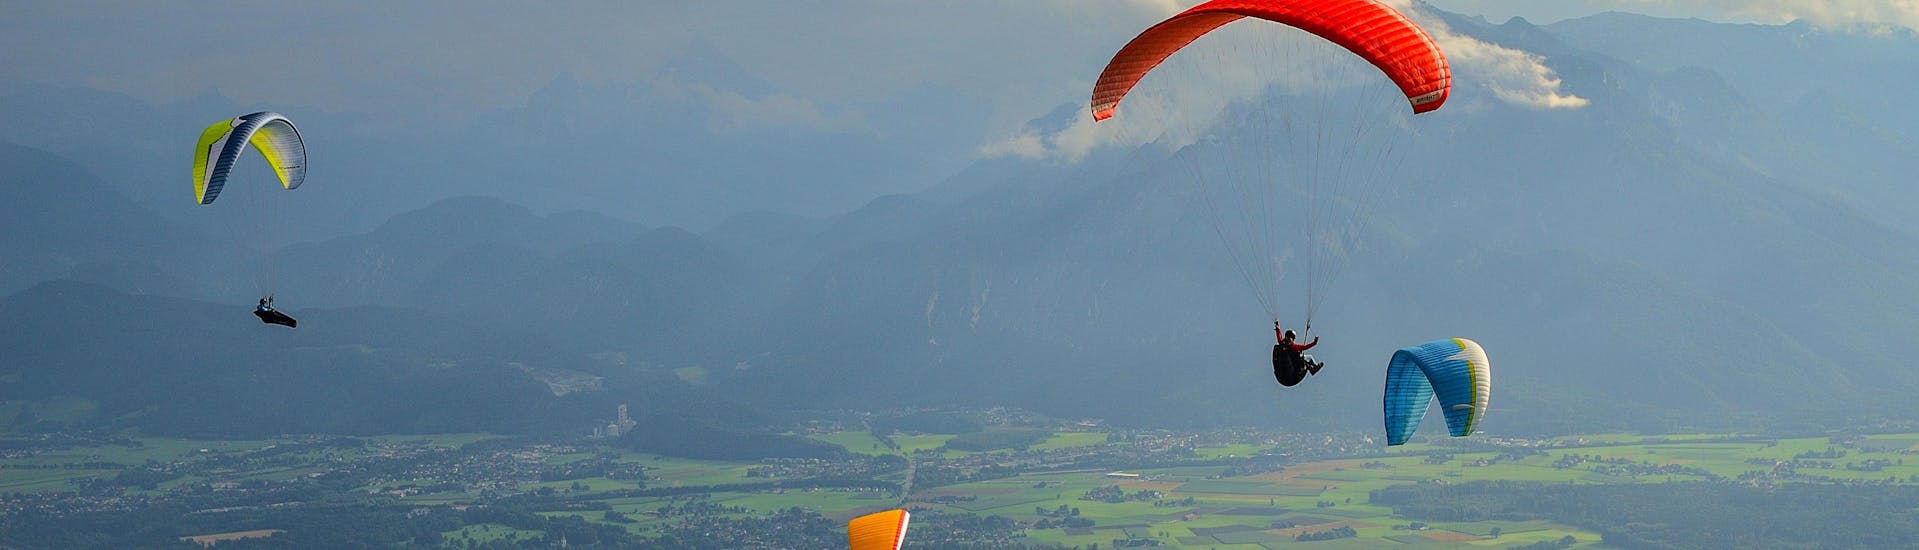 A tandem master and his passenger are sailing through cloudy skies while paragliding in Salzburg.